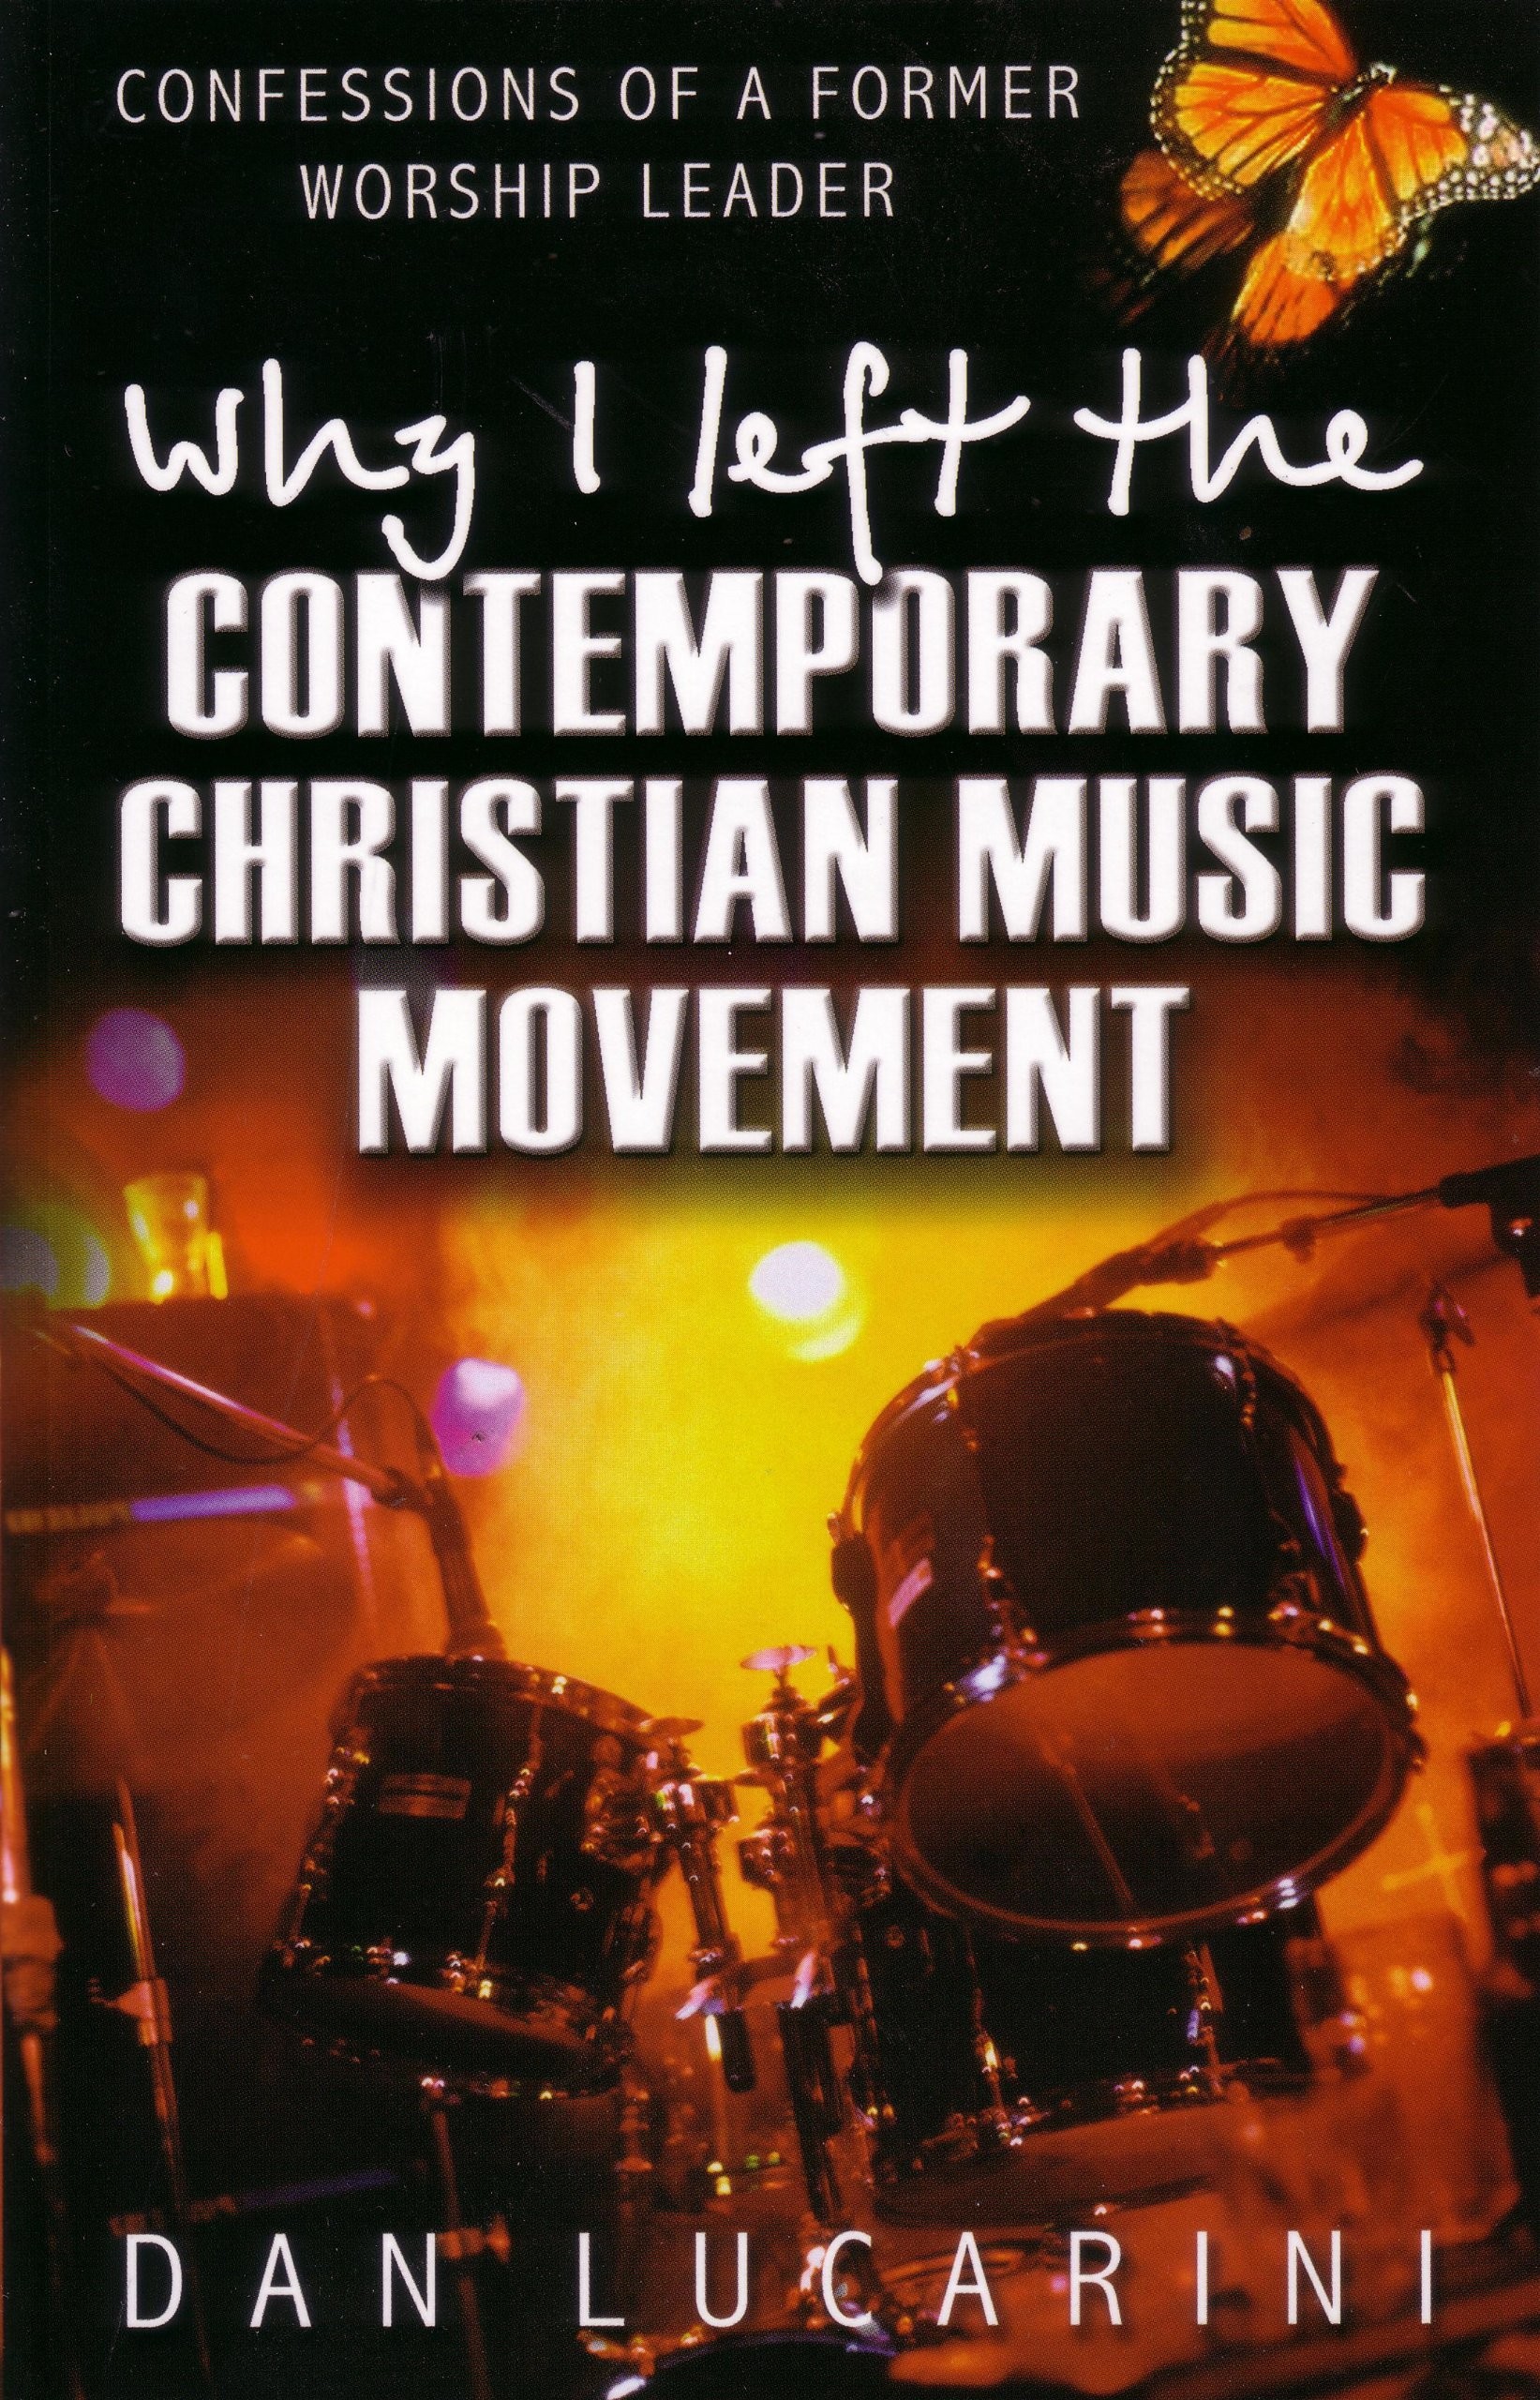 Why I Left the Contemporary Christian Music Movement Confessions of a Former Worship Leader Dan Lucarini 9780852345177 Amazon.com Books